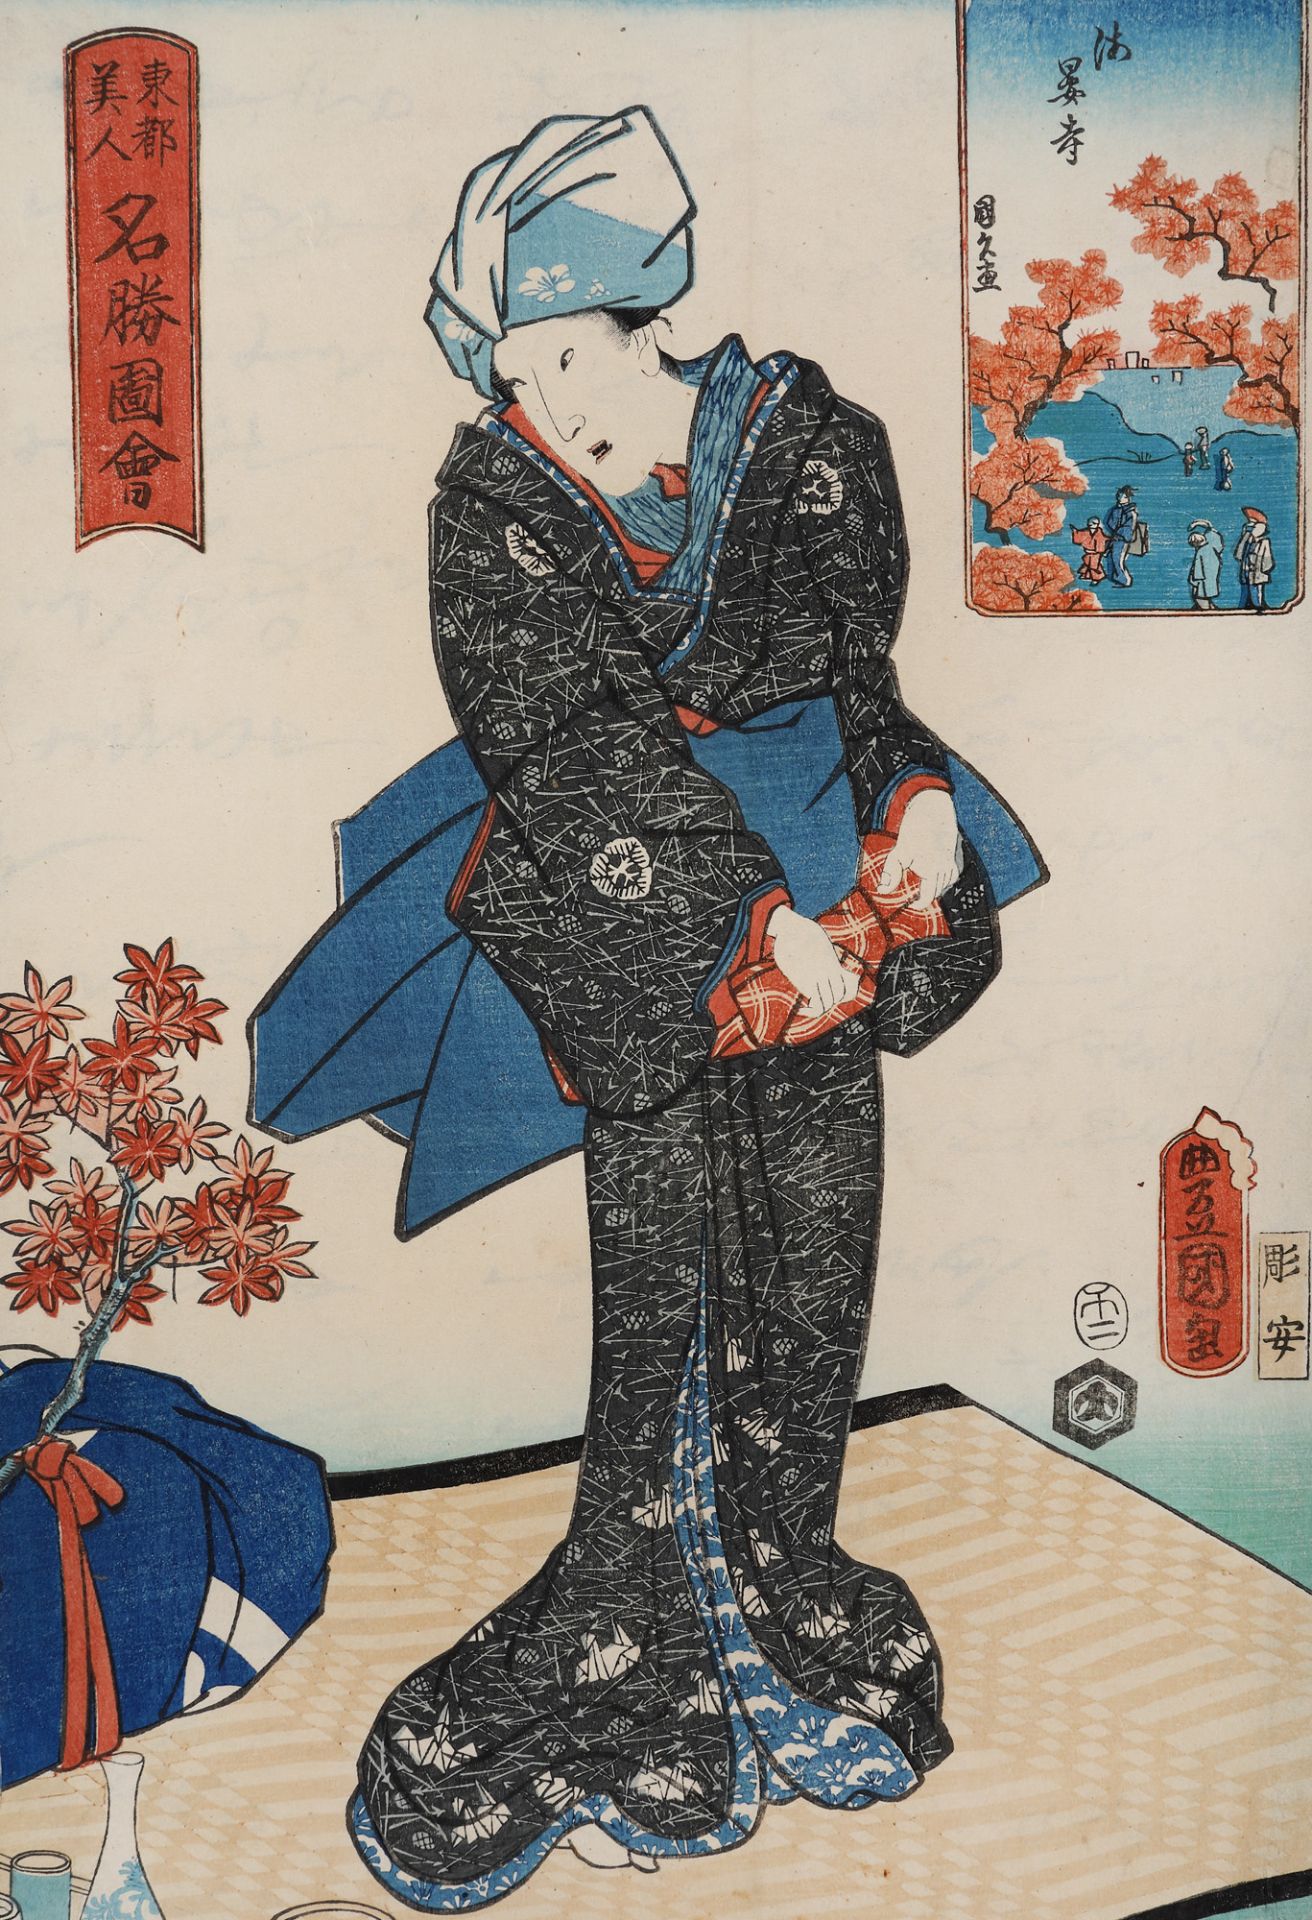 Utagawa  Kunisada, Kaian-ji Temple, from the series "One Hundred Beautiful Women at Famous Places in